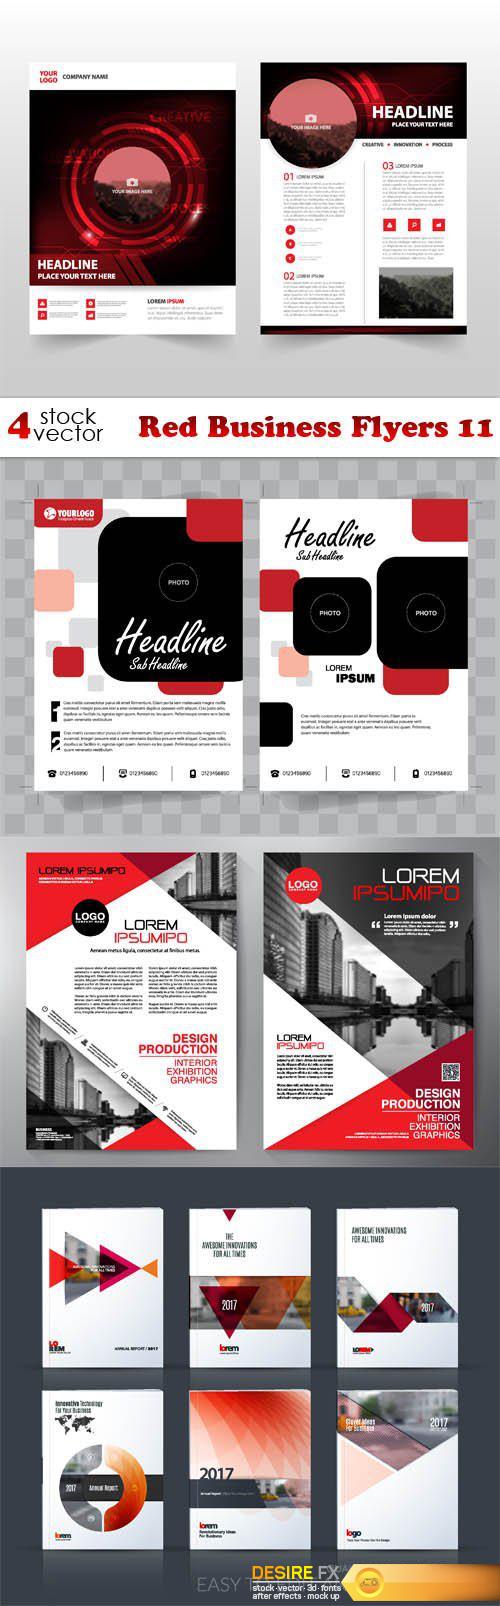 Vectors - Red Business Flyers 11